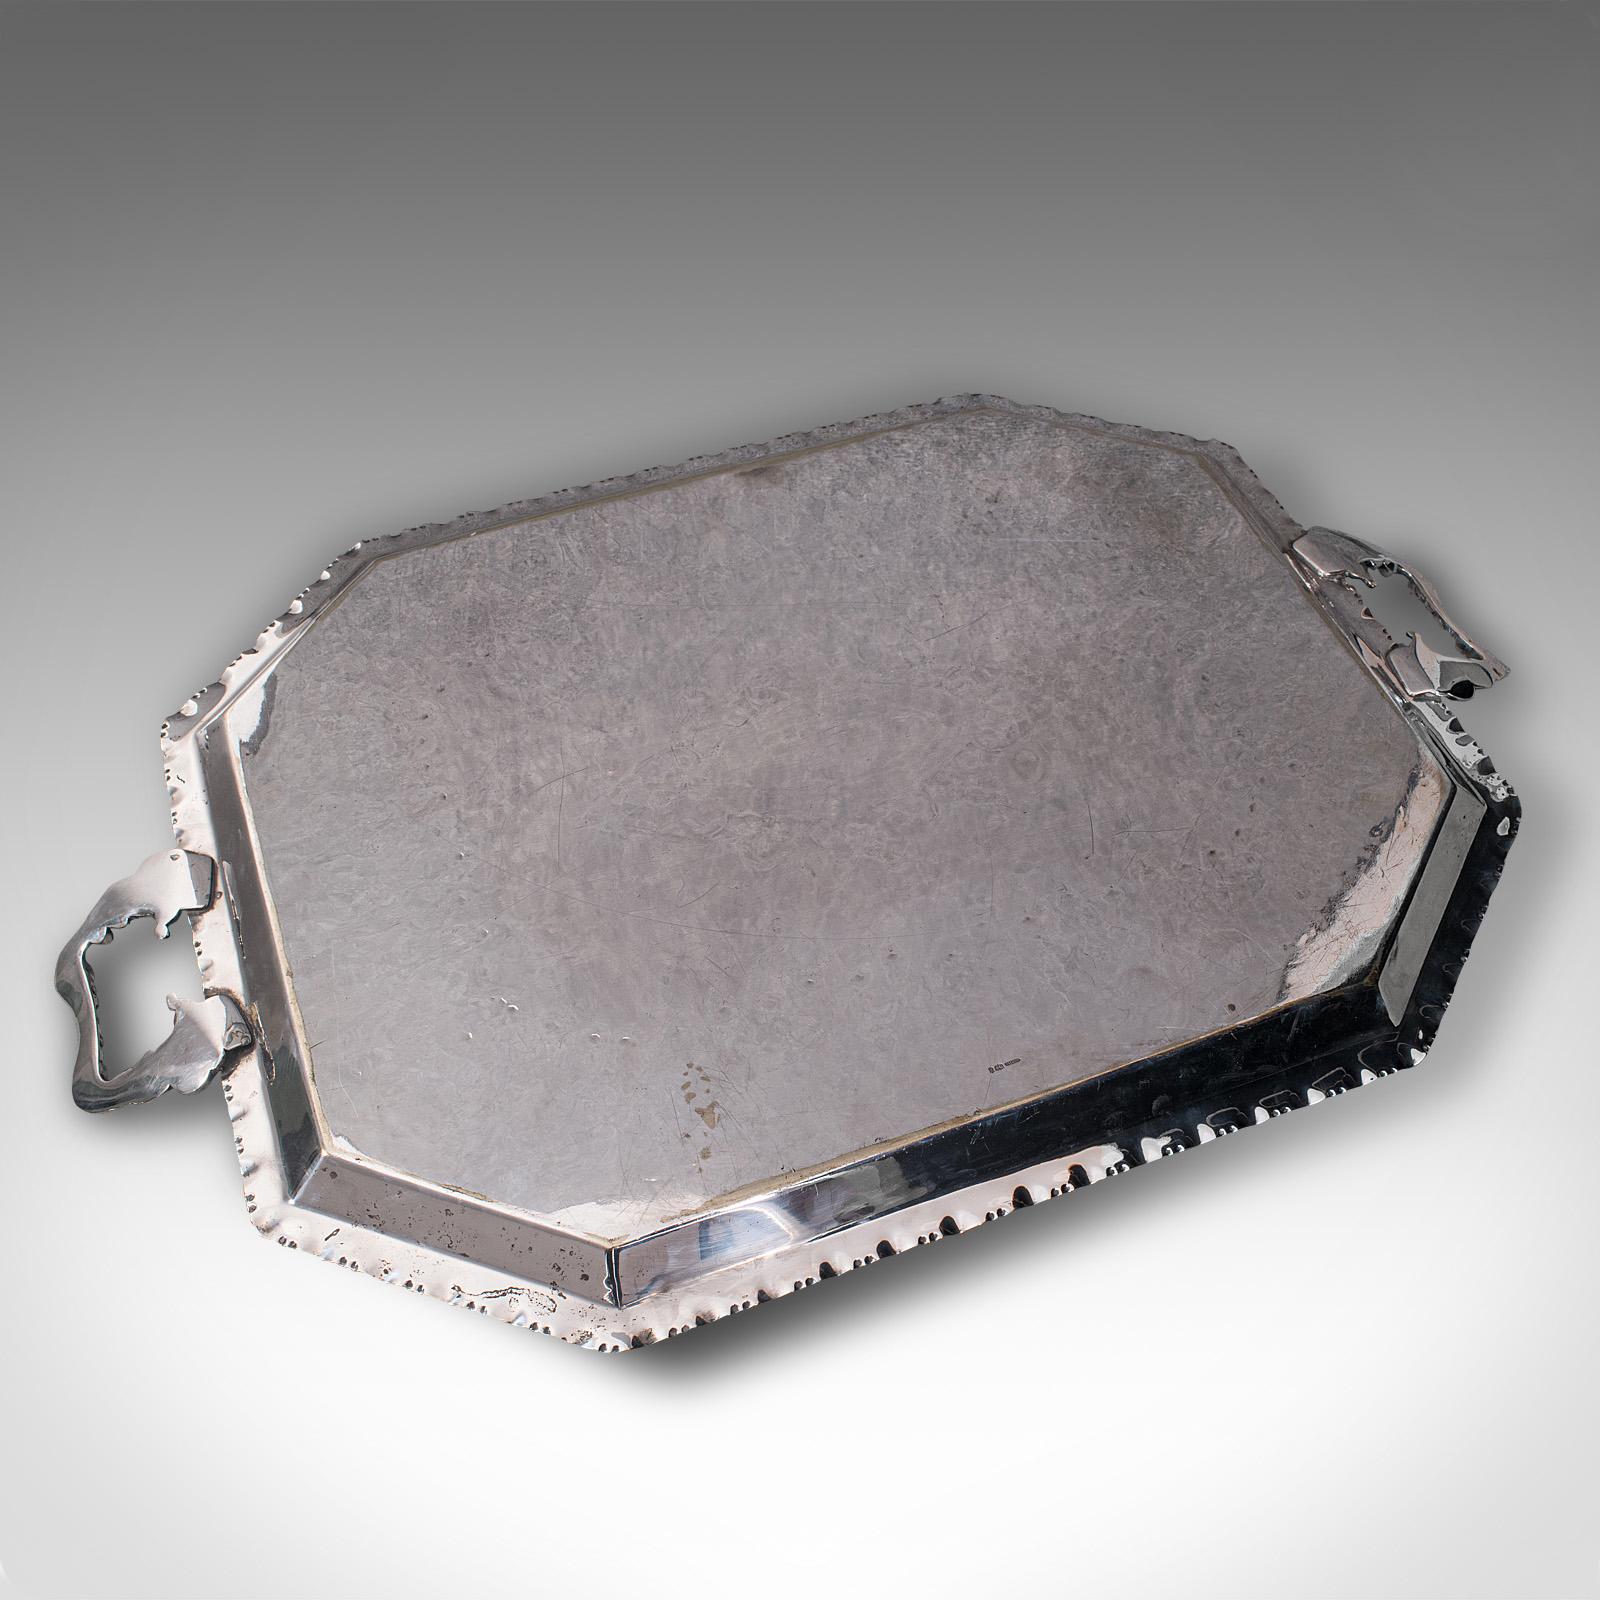 Antique Presentation Serving Tray, English, Silver Plated, Afternoon Tea, C.1895 For Sale 3